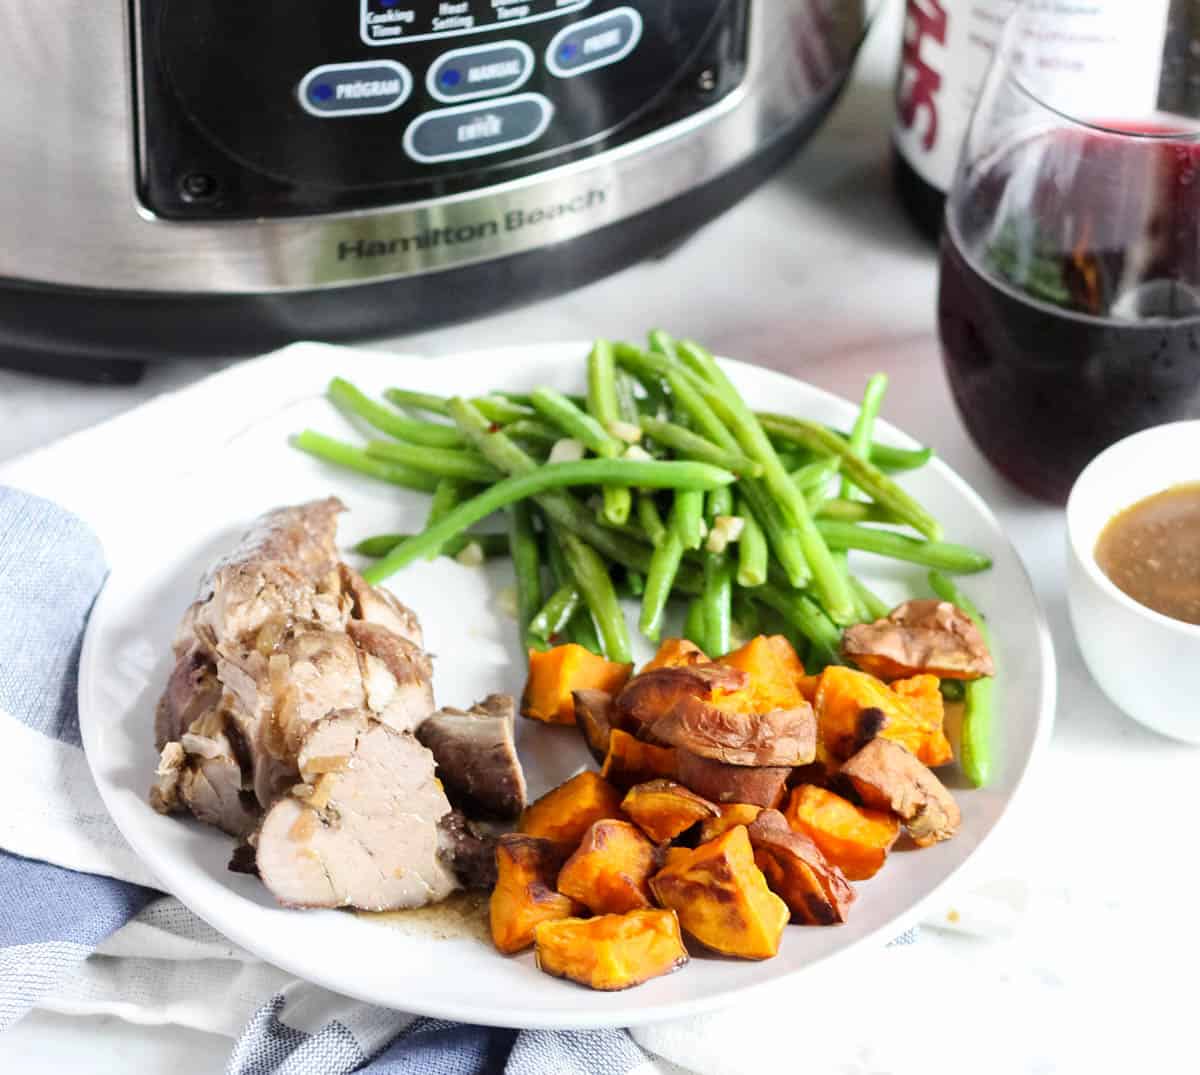 slow cooker, bottle of wine, glass of wine, and a bowl of gravy next to a plate of pork tenderloin, green beans, and roasted sweet potatoes.